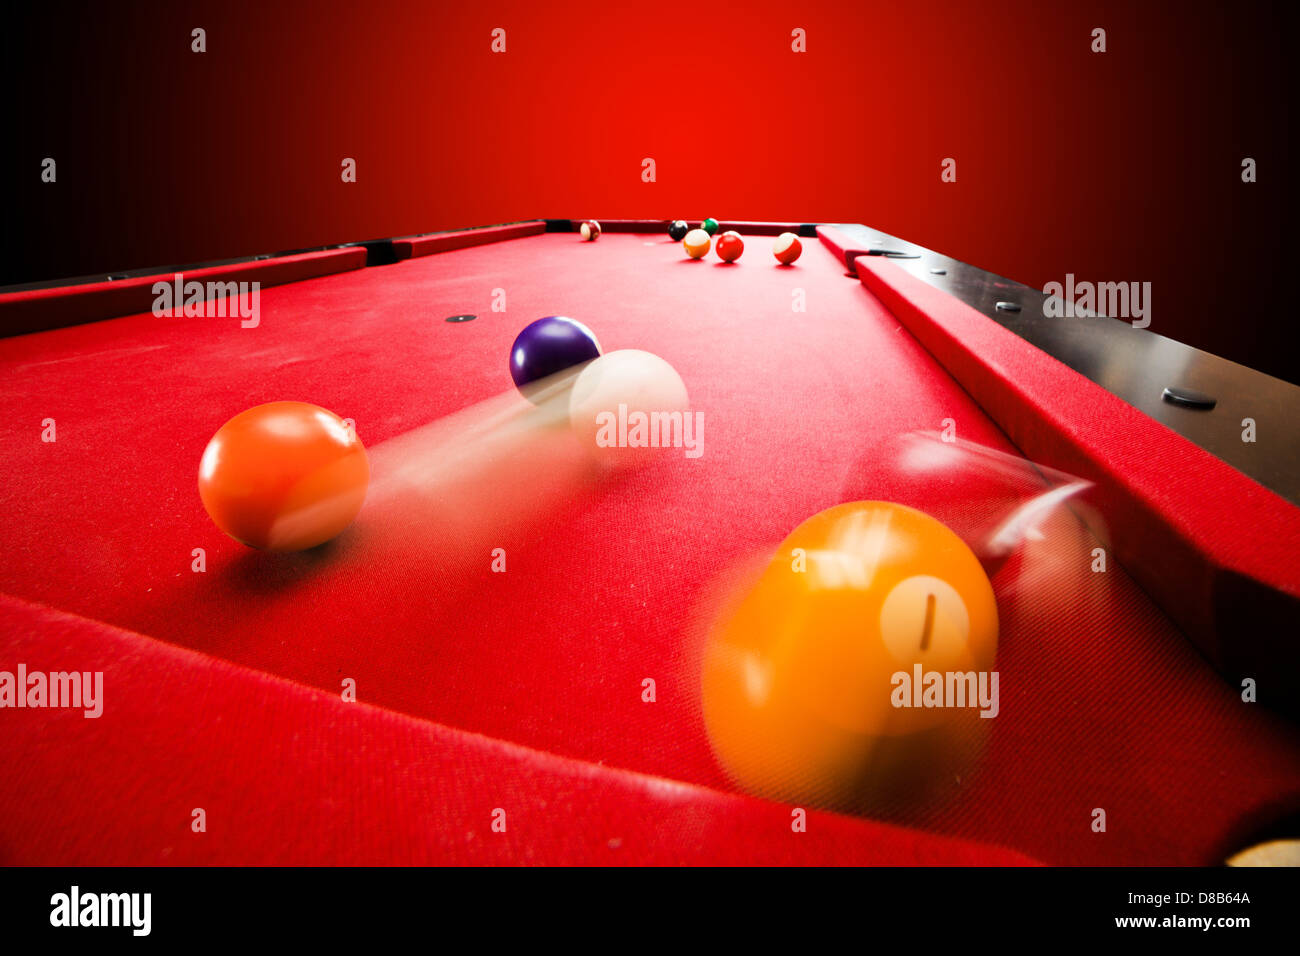 Billards pool game. Breaking the color ball from triangle. Red cloth table Stock Photo